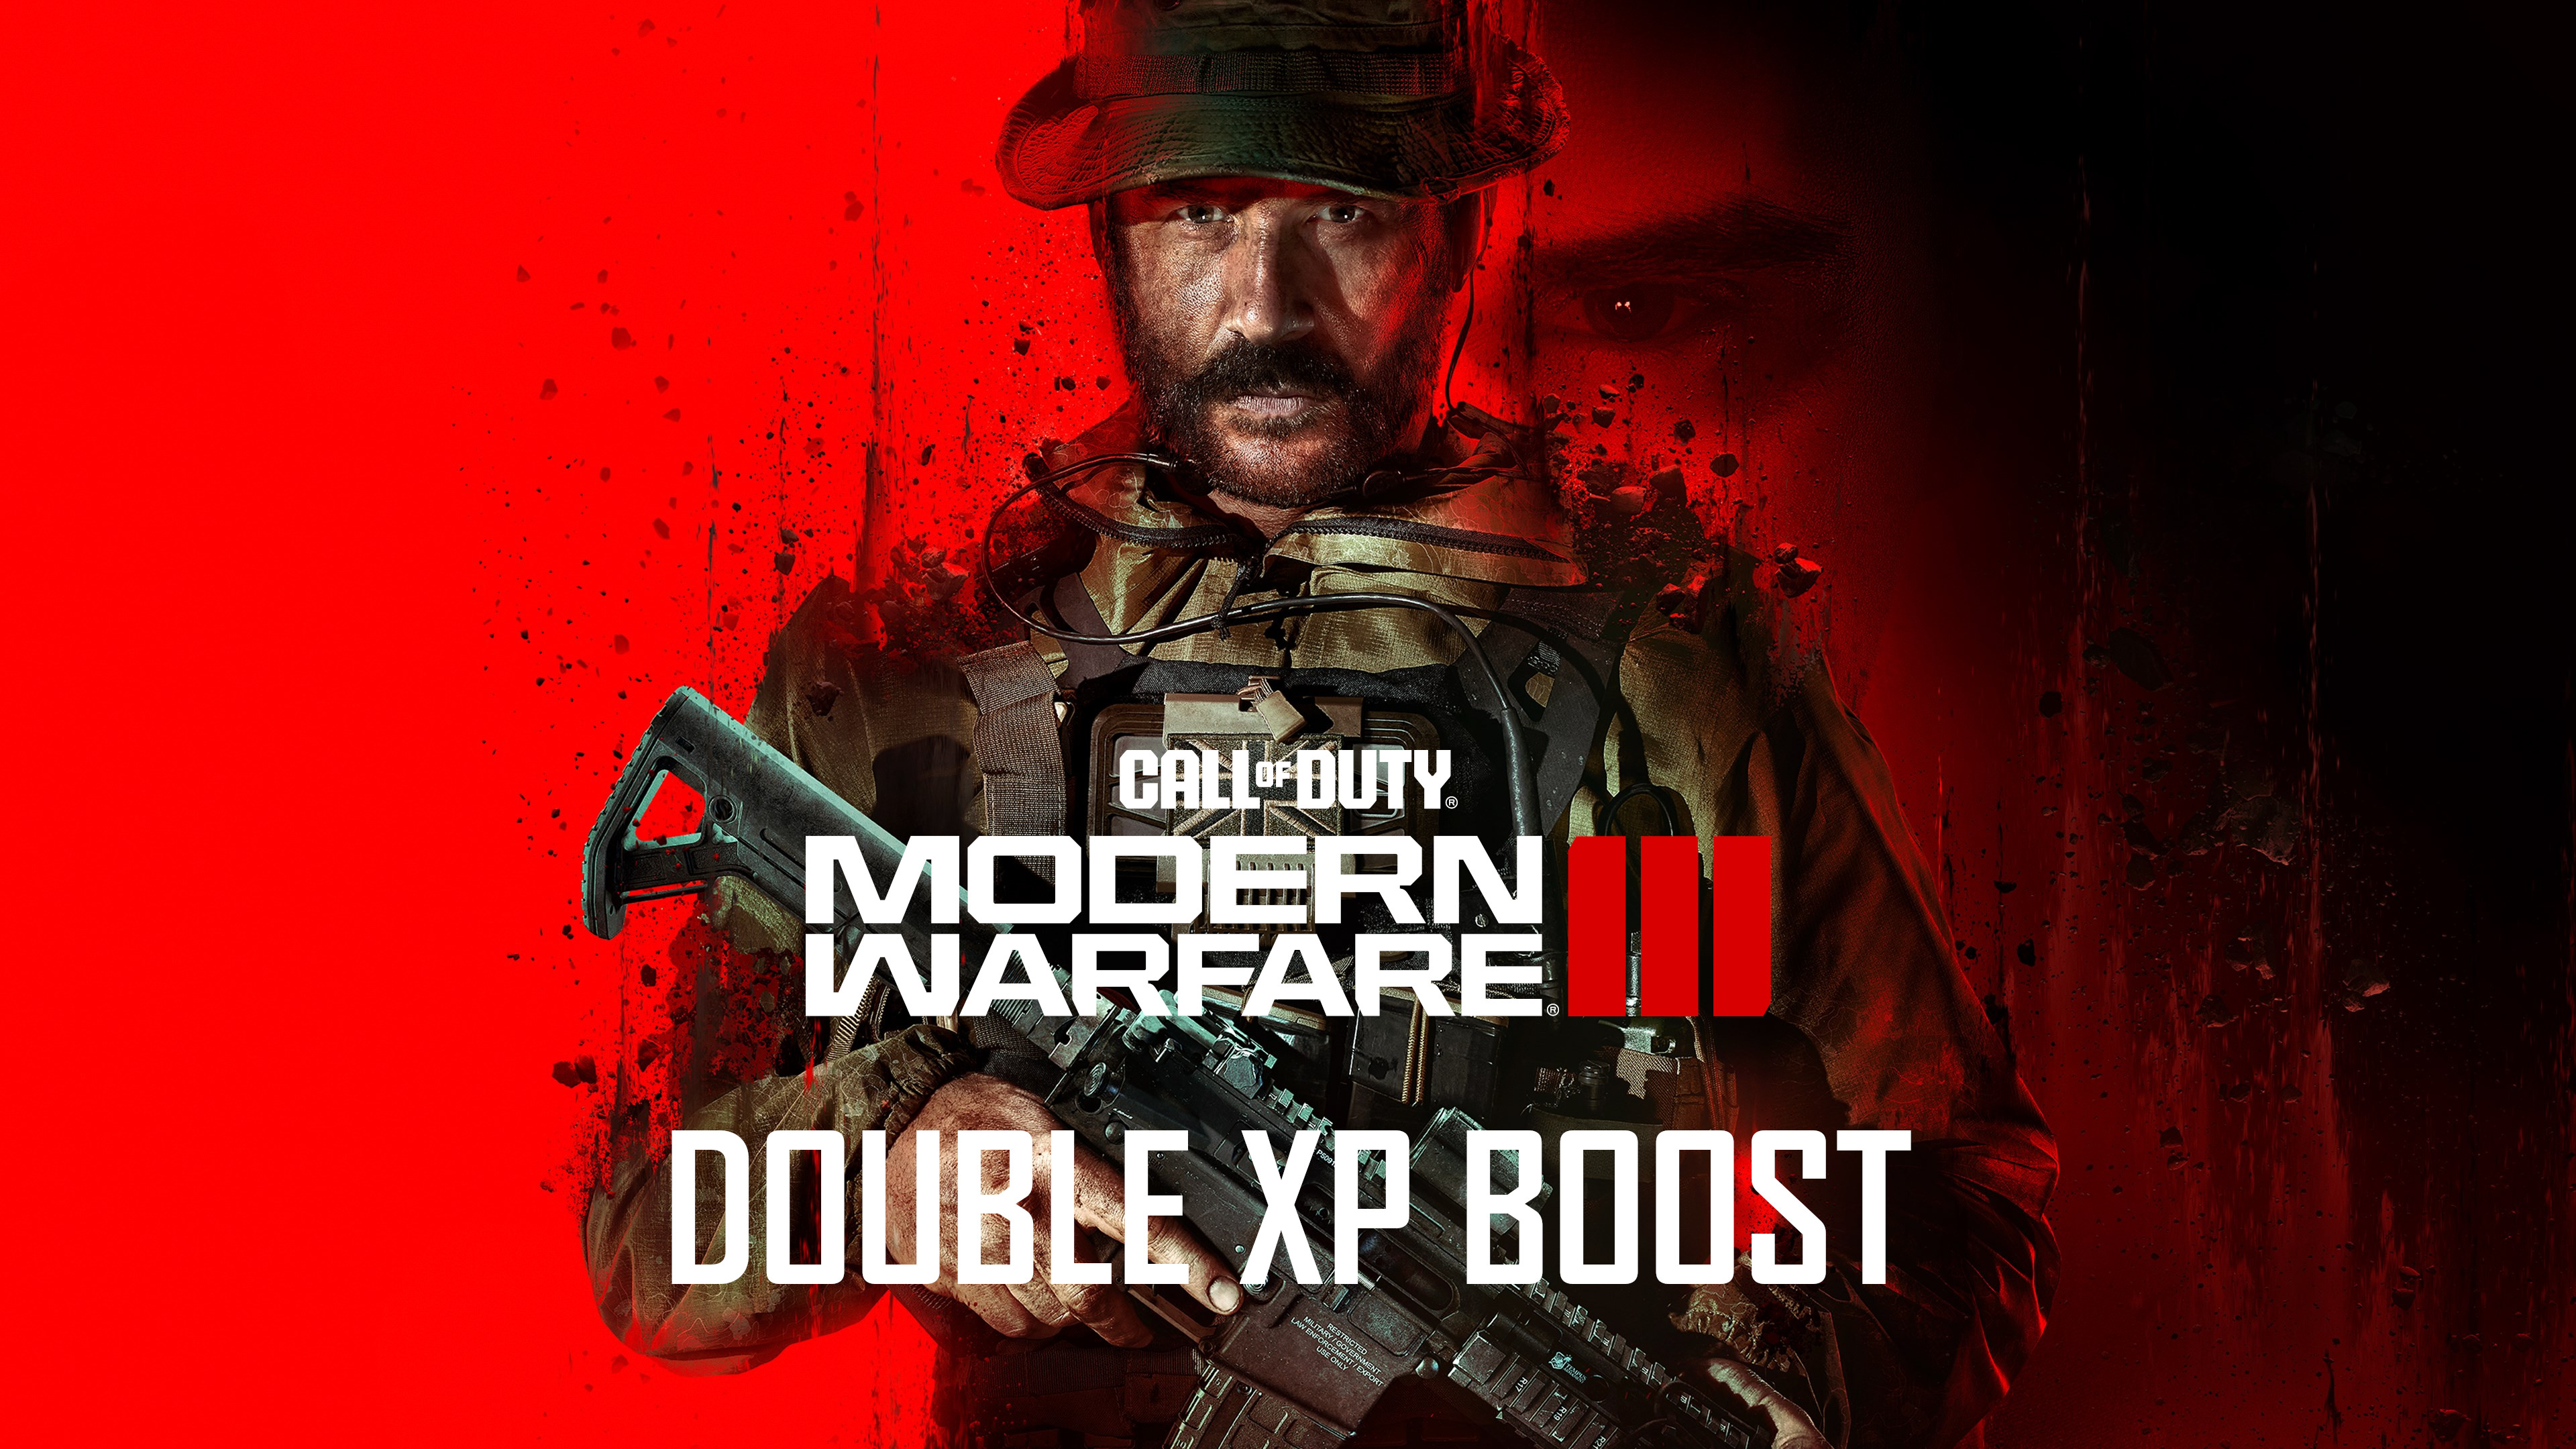 Call of Duty: Modern Warfare III - 5 Hours Double XP Boost PC/PS4/PS5/XBOX One/Series X|S CD Key 4.52 usd